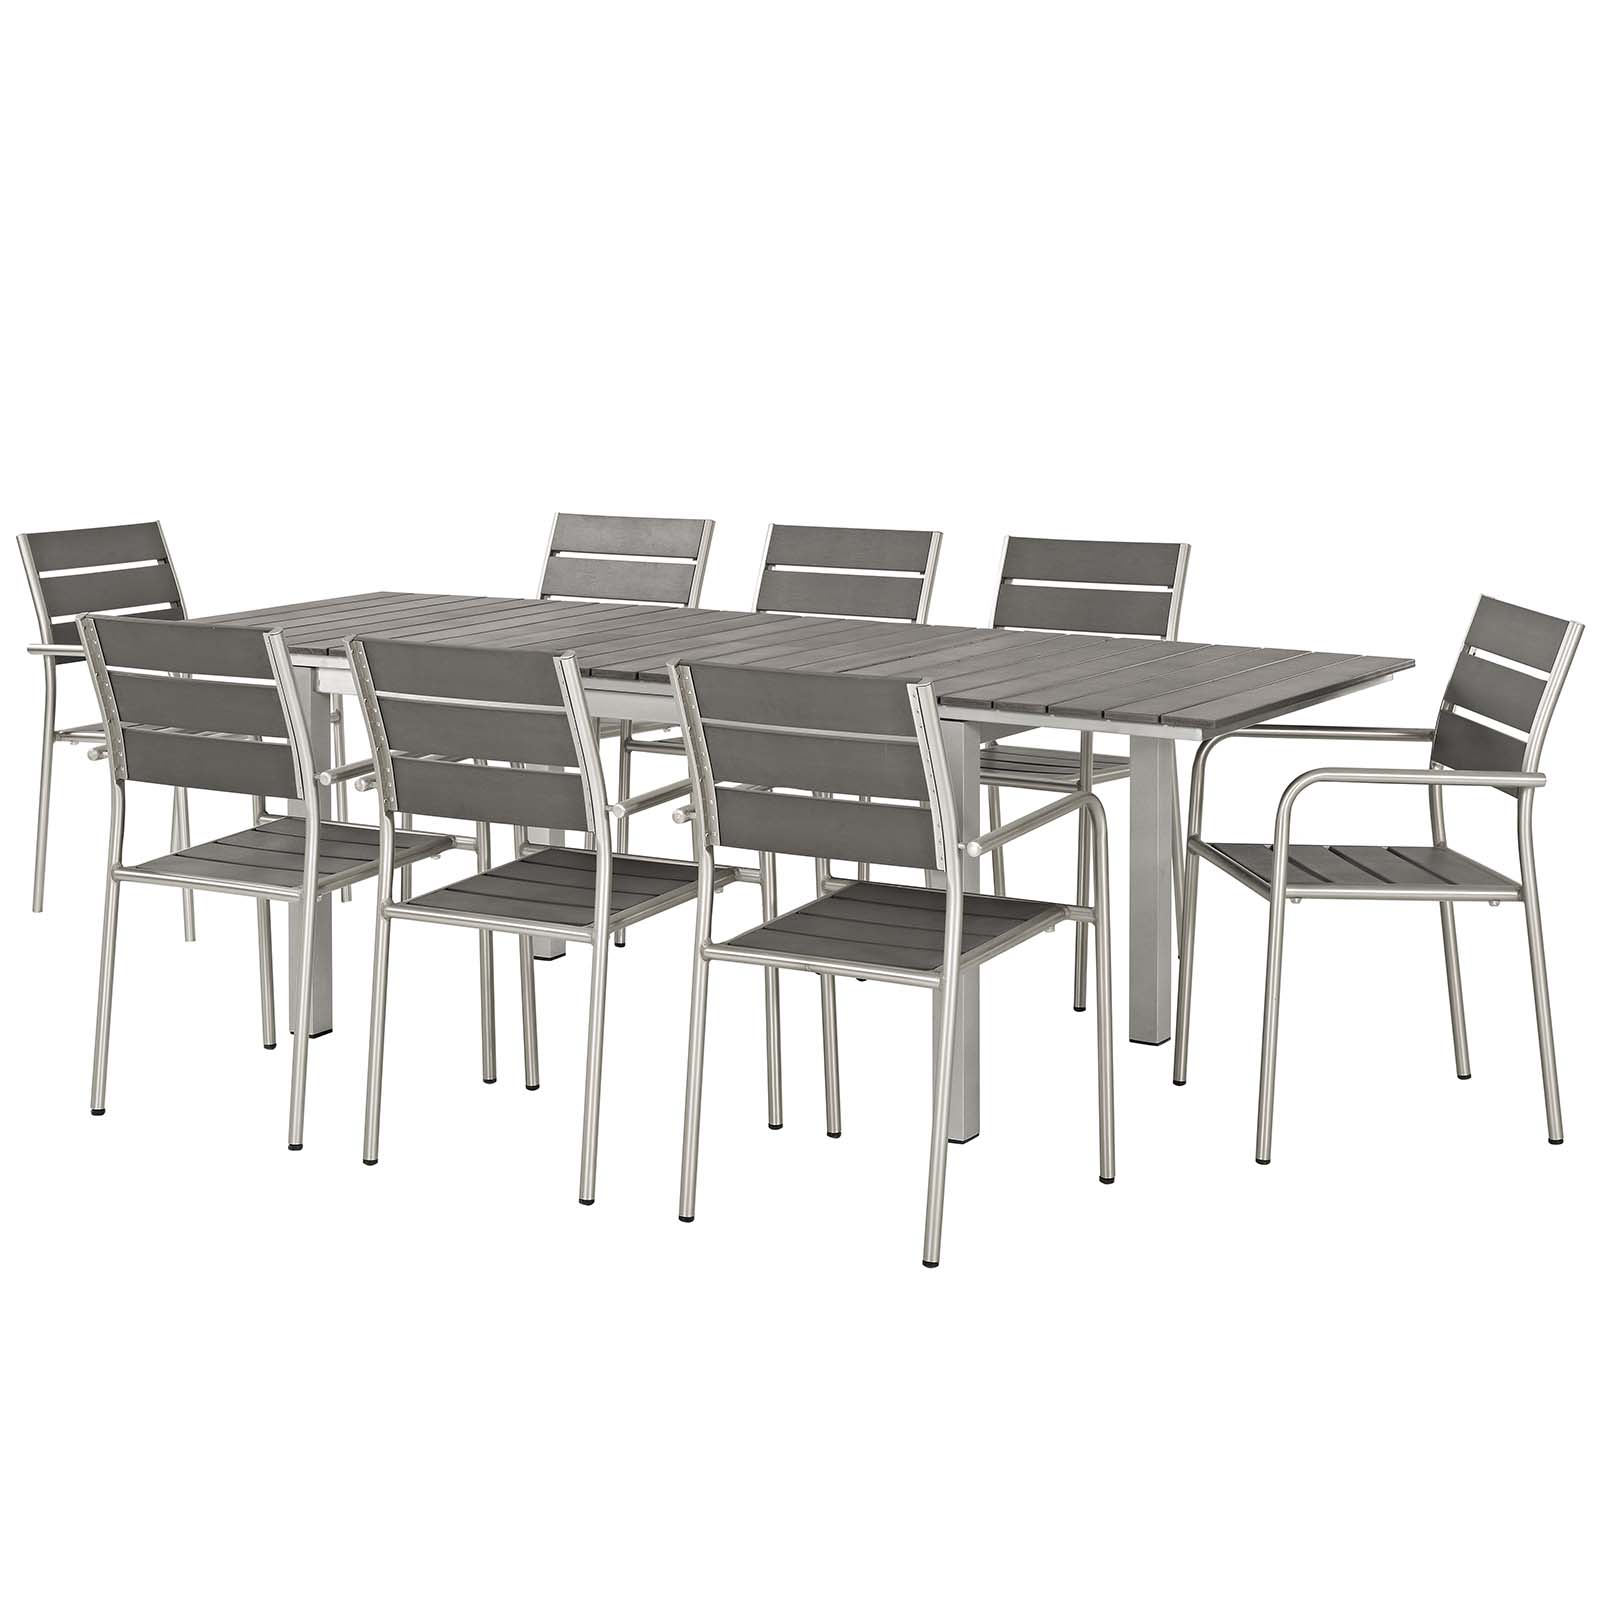 Modern Contemporary Urban Design Outdoor Patio Balcony Garden Furniture Side Dining Chair and Table Set, Aluminum Metal Steel, Grey Gray - image 1 of 9